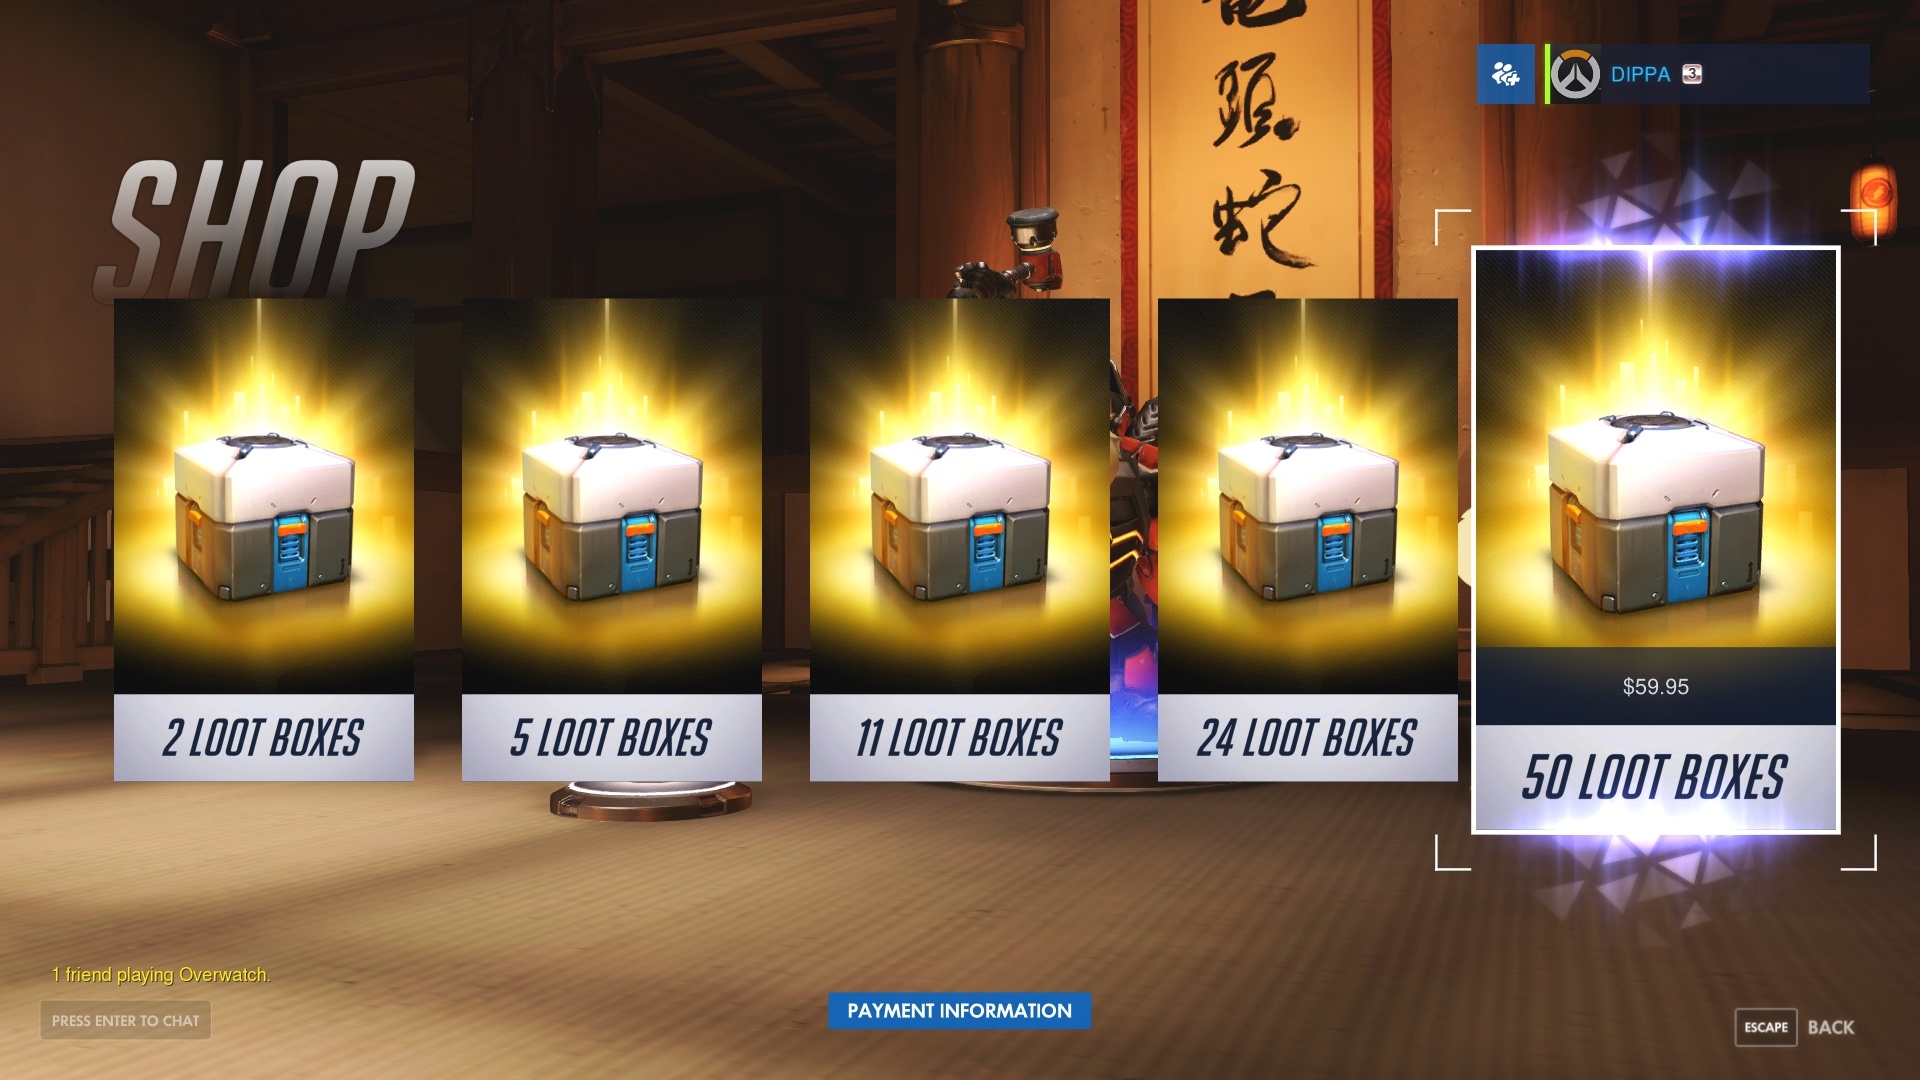 UK Gambling Commission restates that loot boxes are not gambling